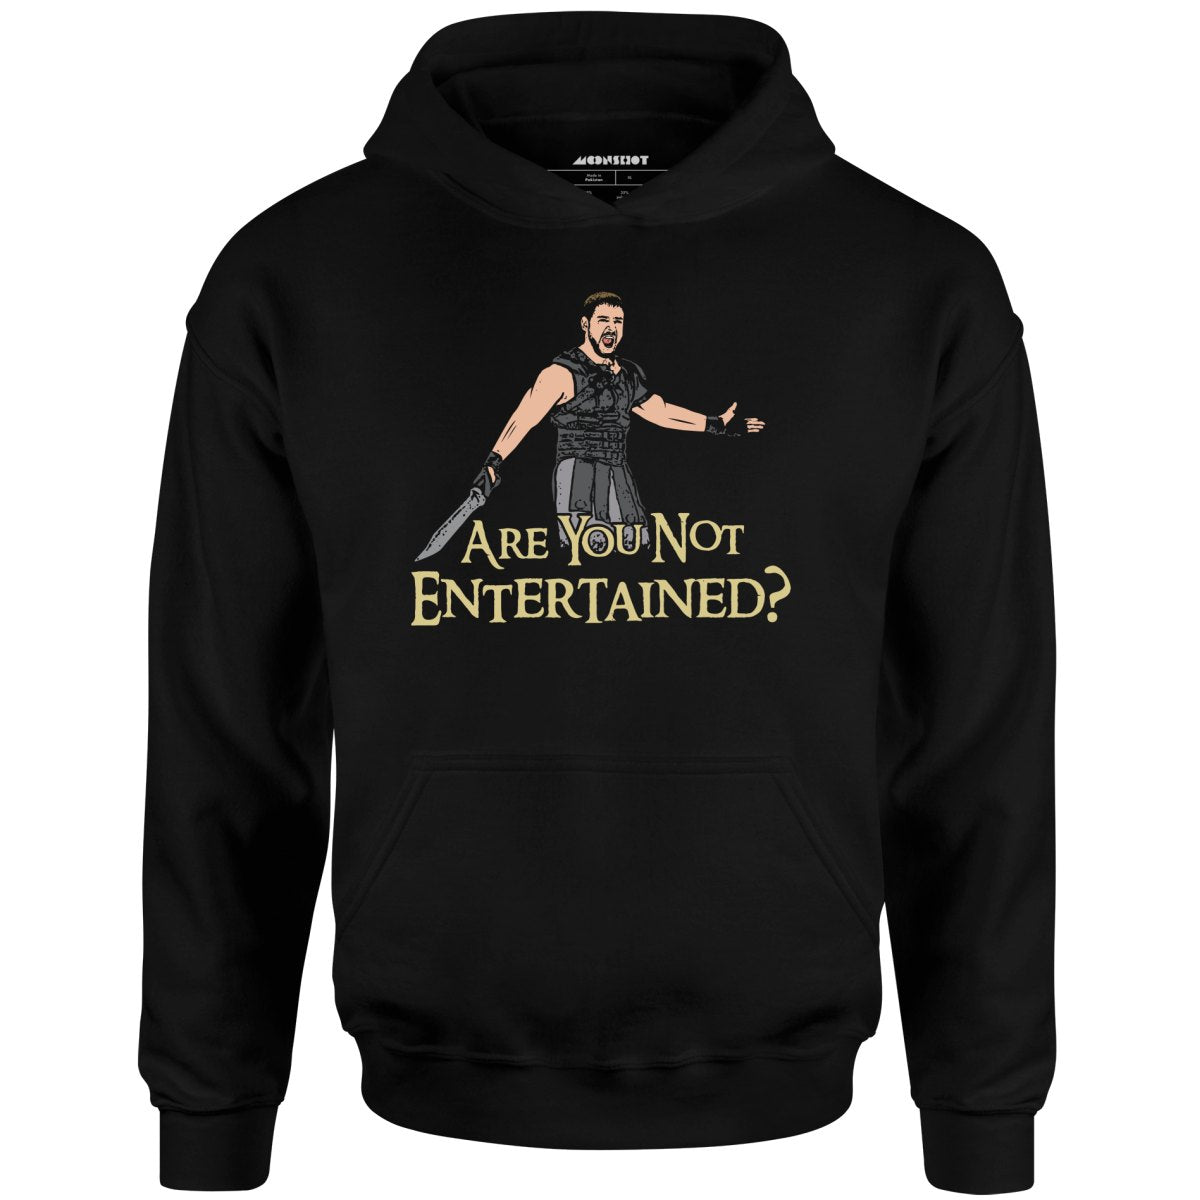 Are You Not Entertained? - Unisex Hoodie